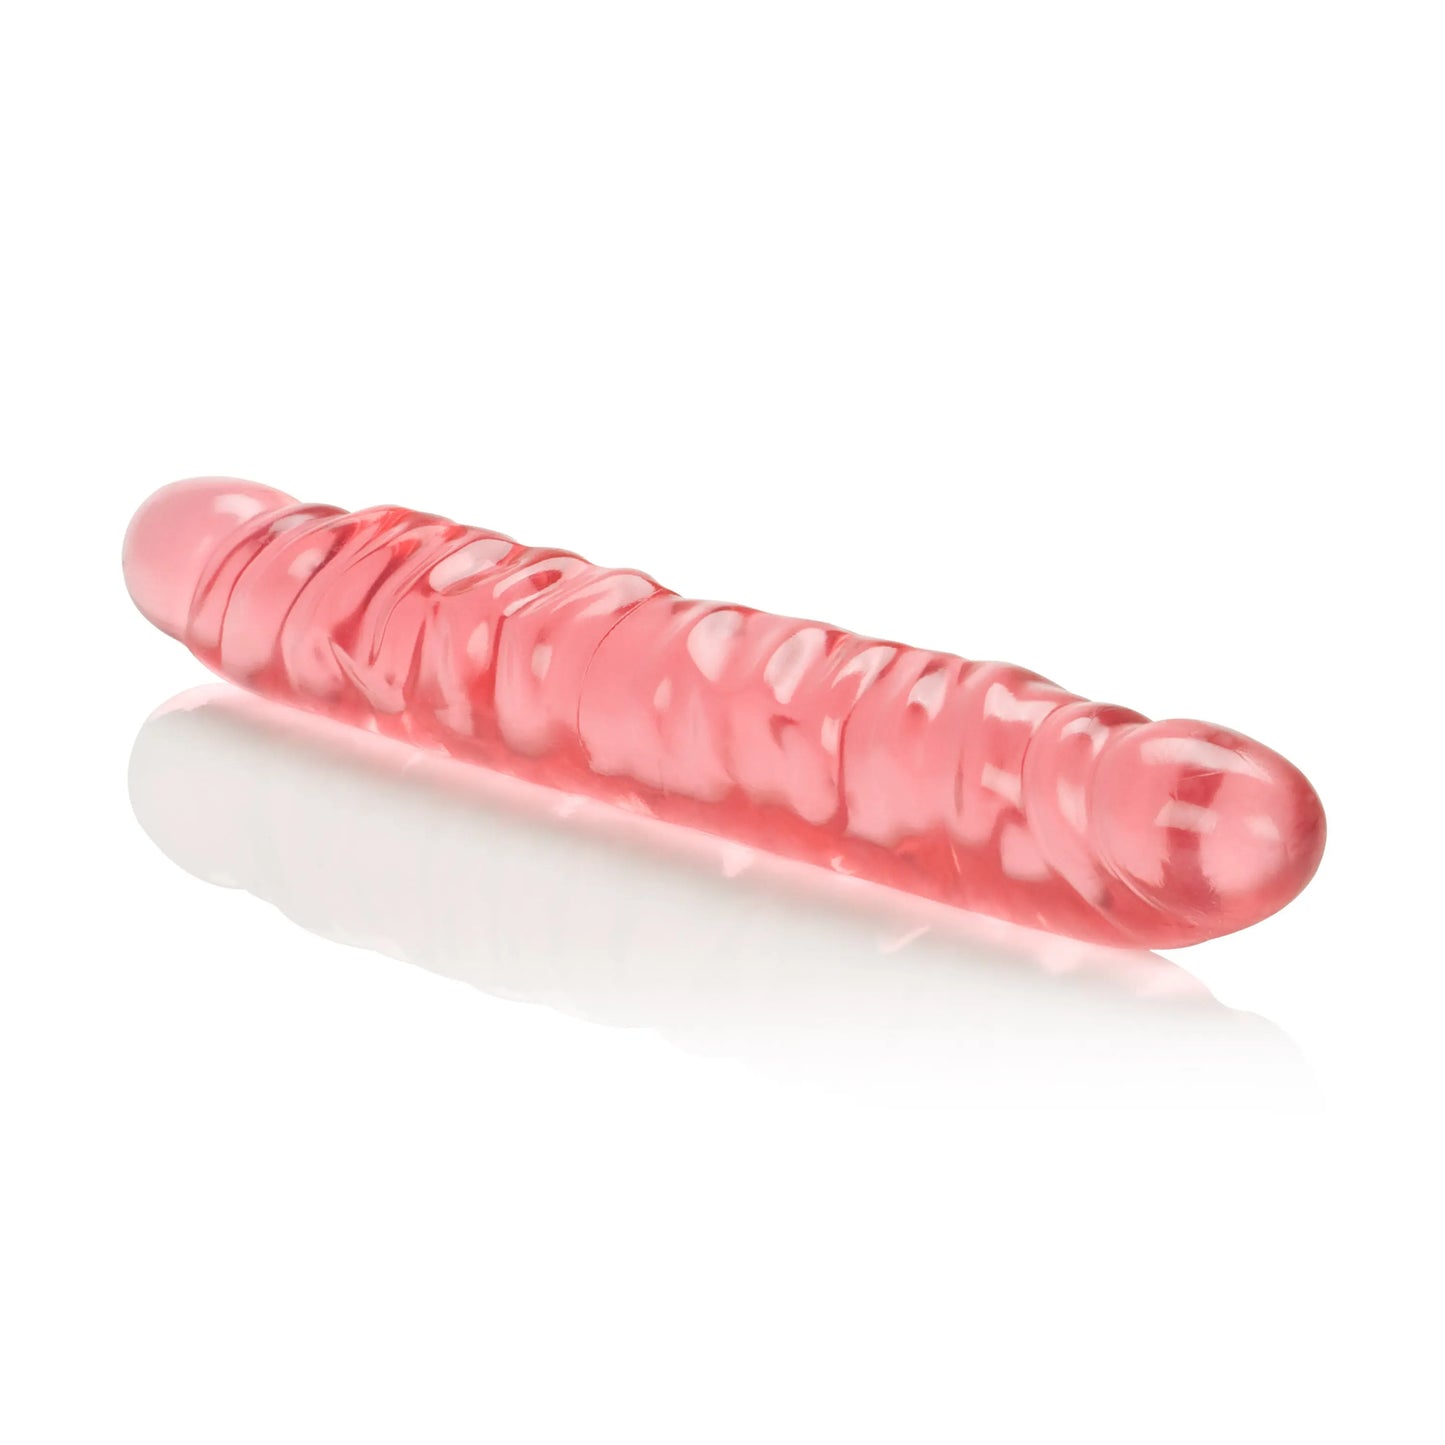 Translucence 12 Inches Veined Double Dong - Pink